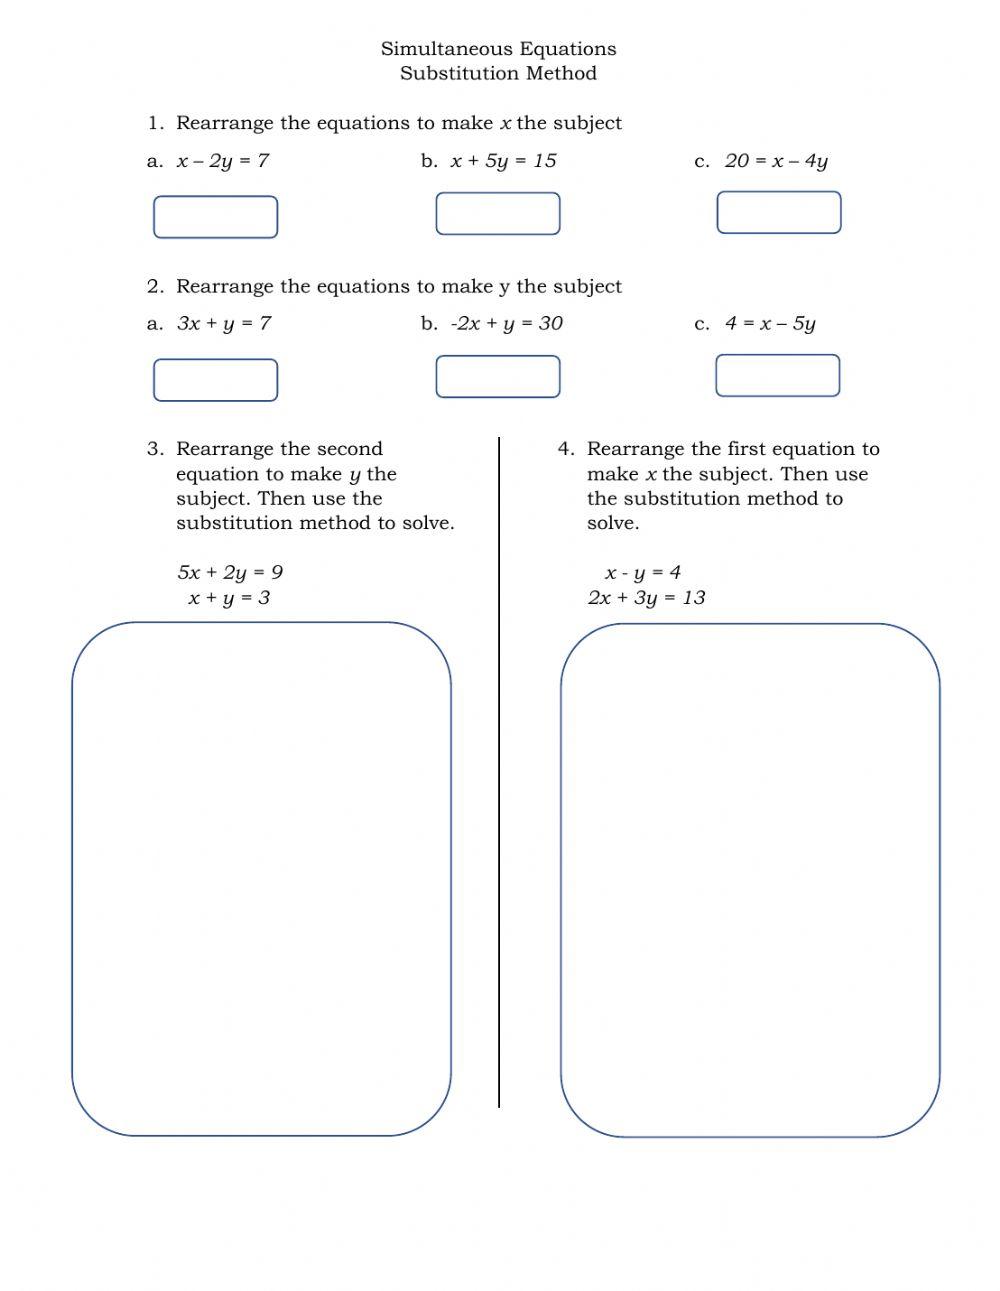 Simultaneous Equations - Substitution